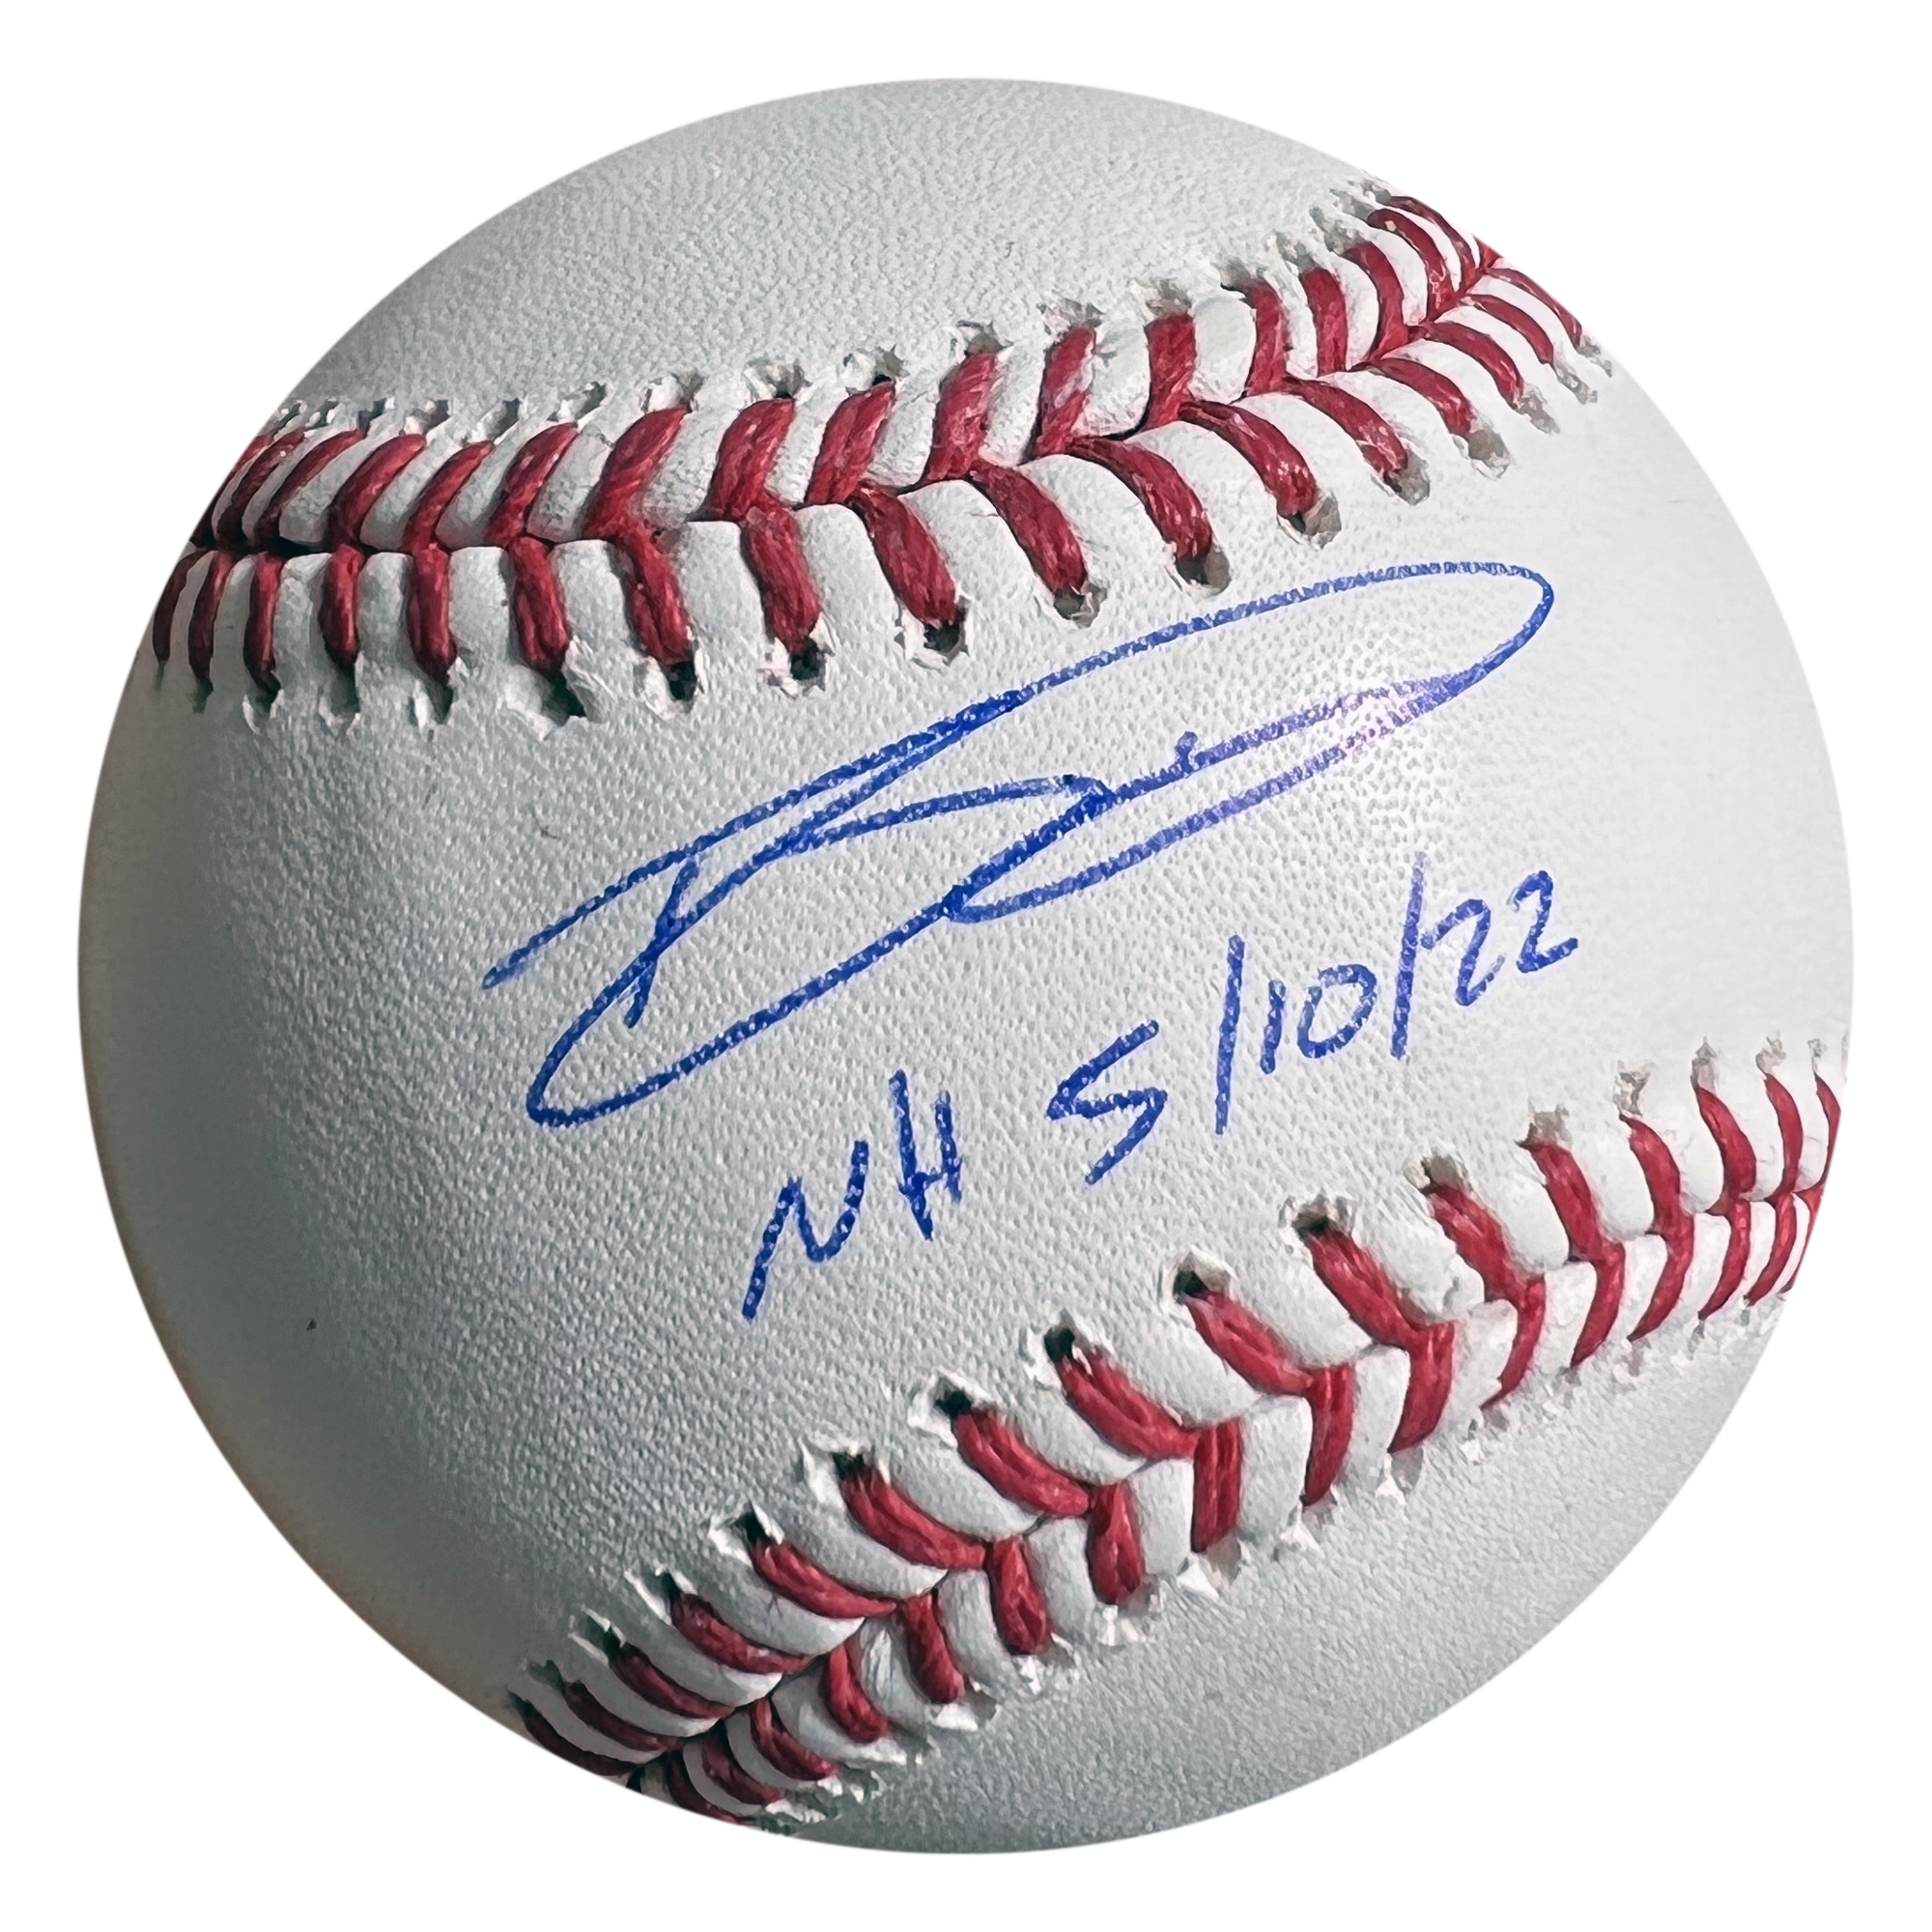 Curt Schilling Autographed Signed Official MLB Baseball Inscribed